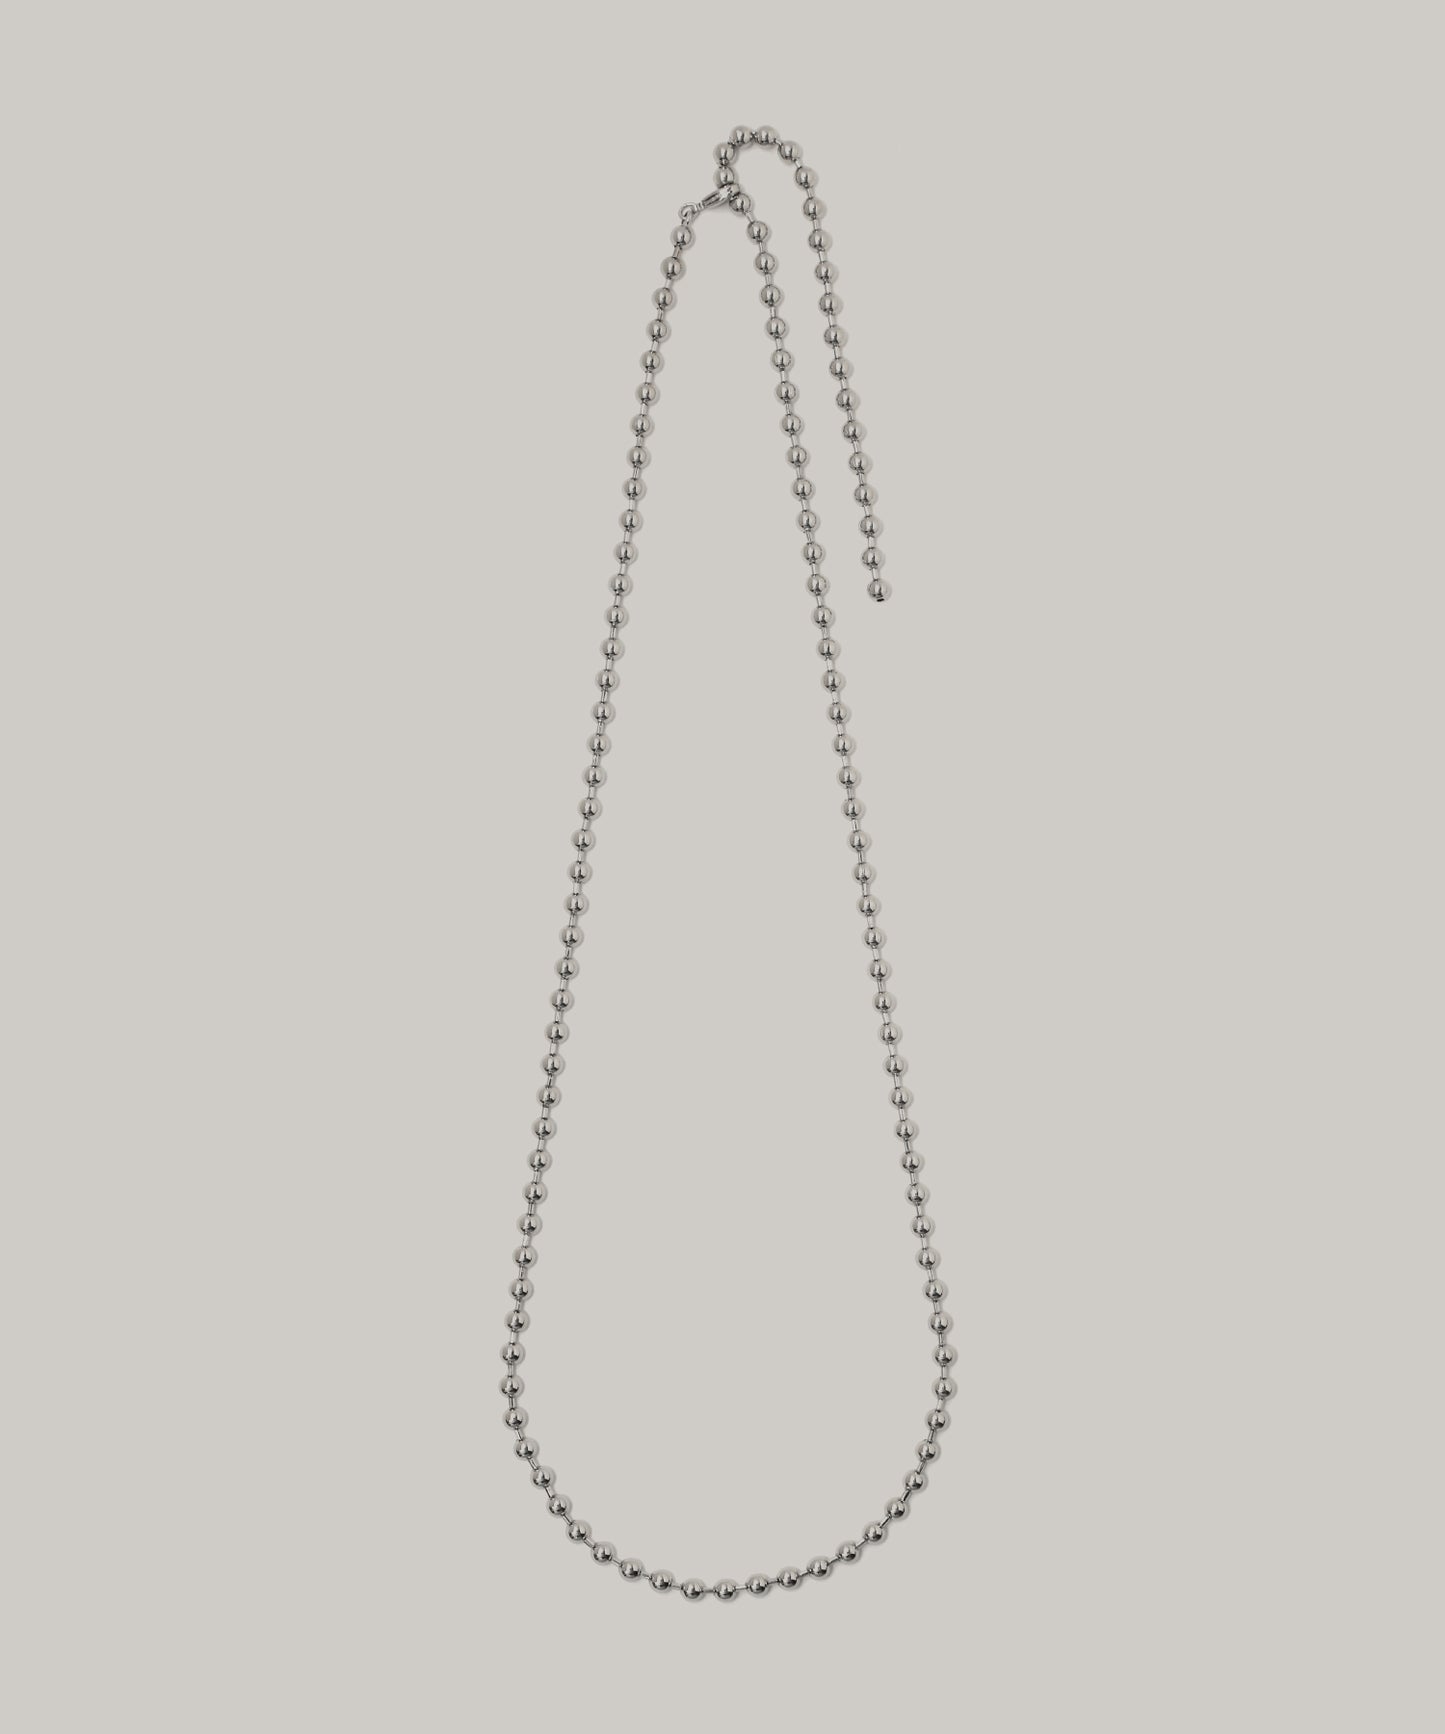 tres Long sphere Necklace (Silver) 2